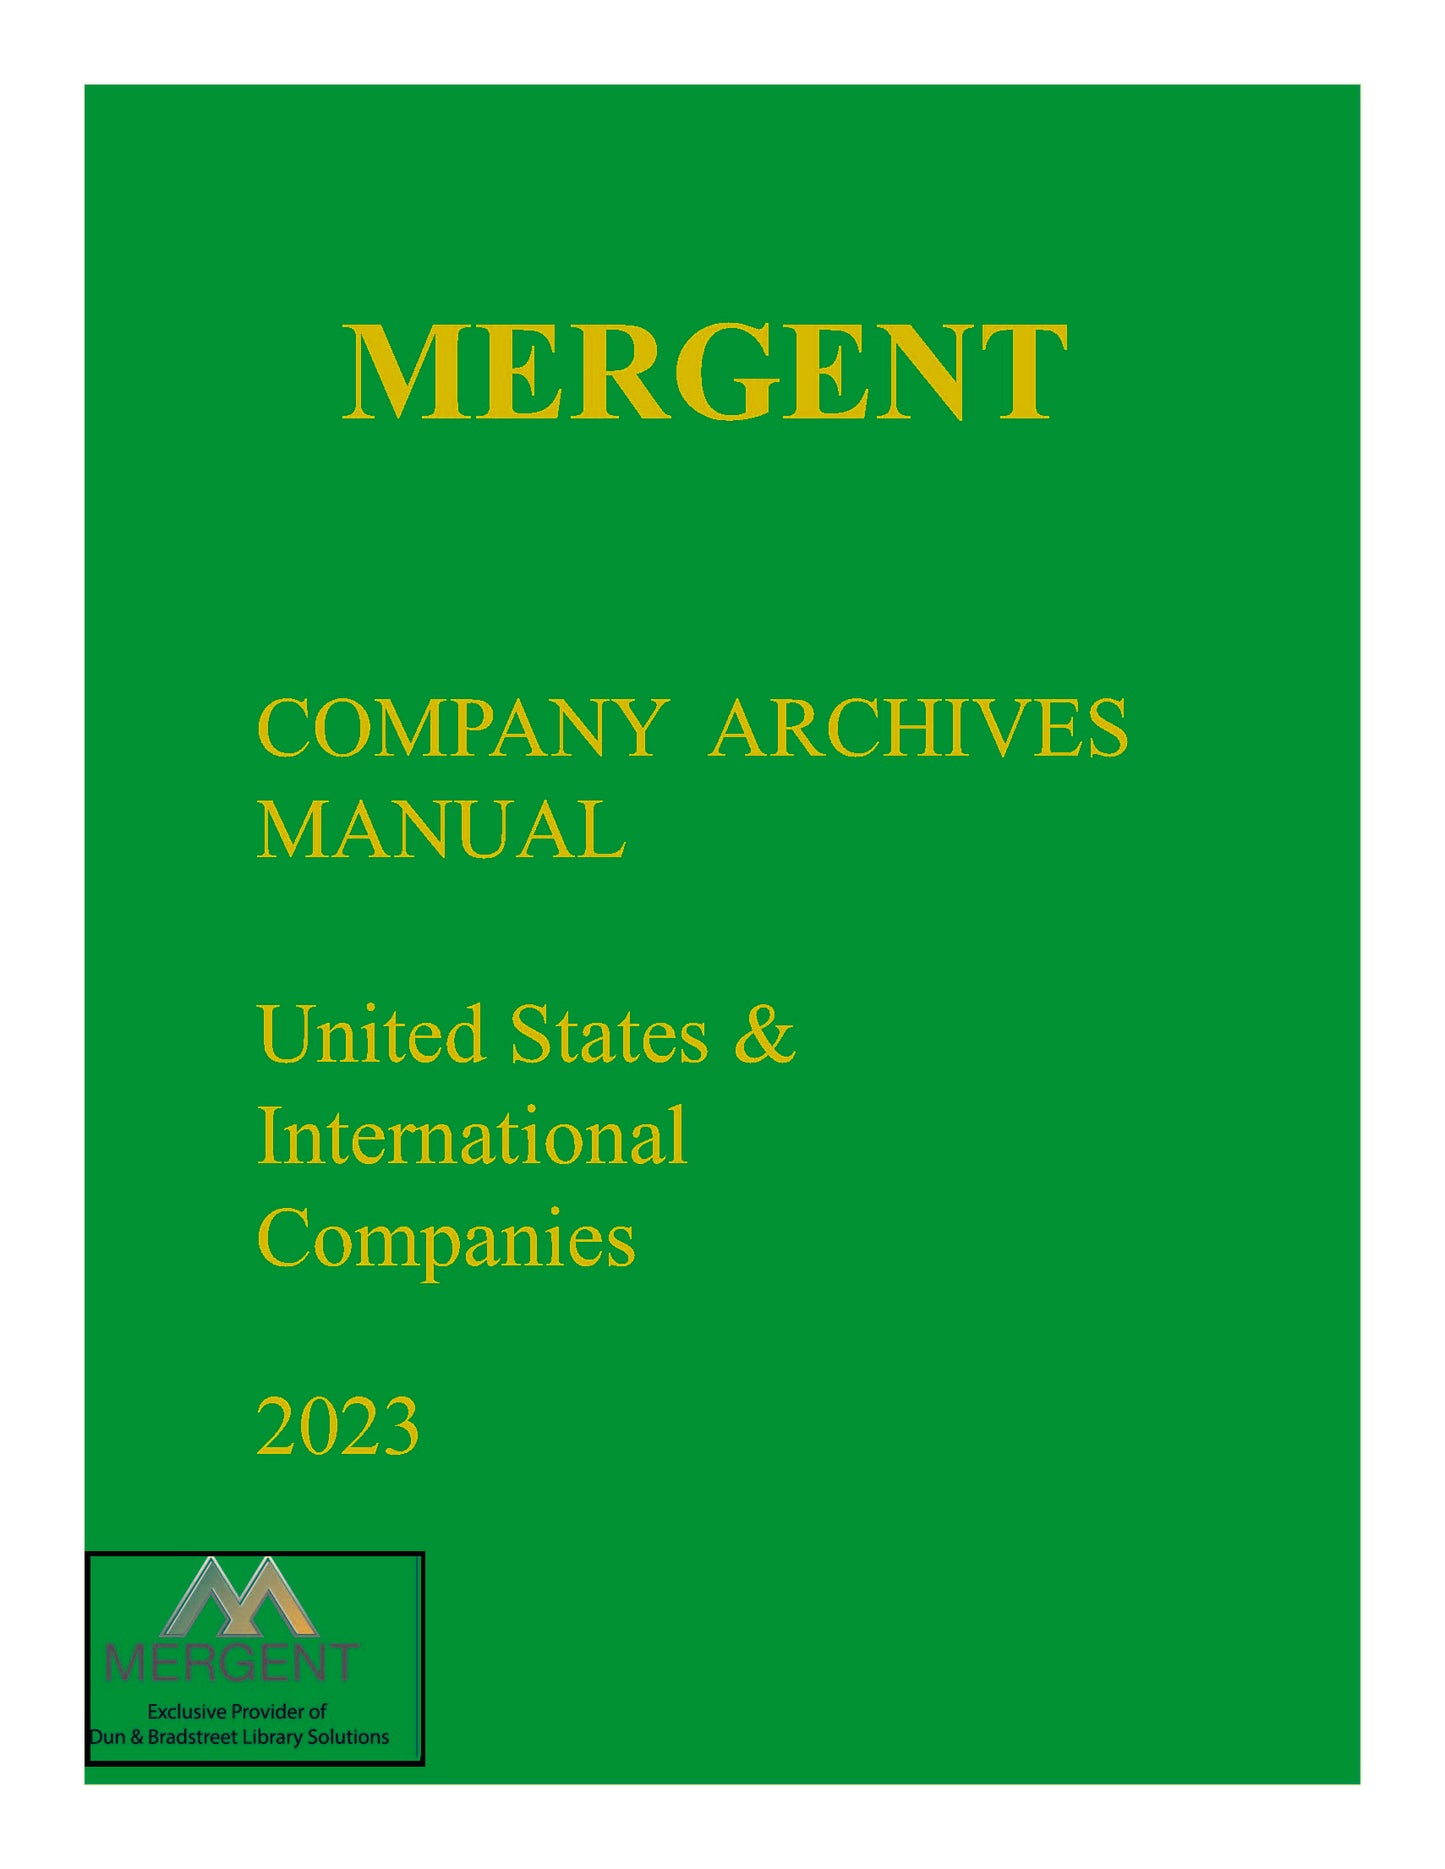 Company Archives Manual (US & International included)